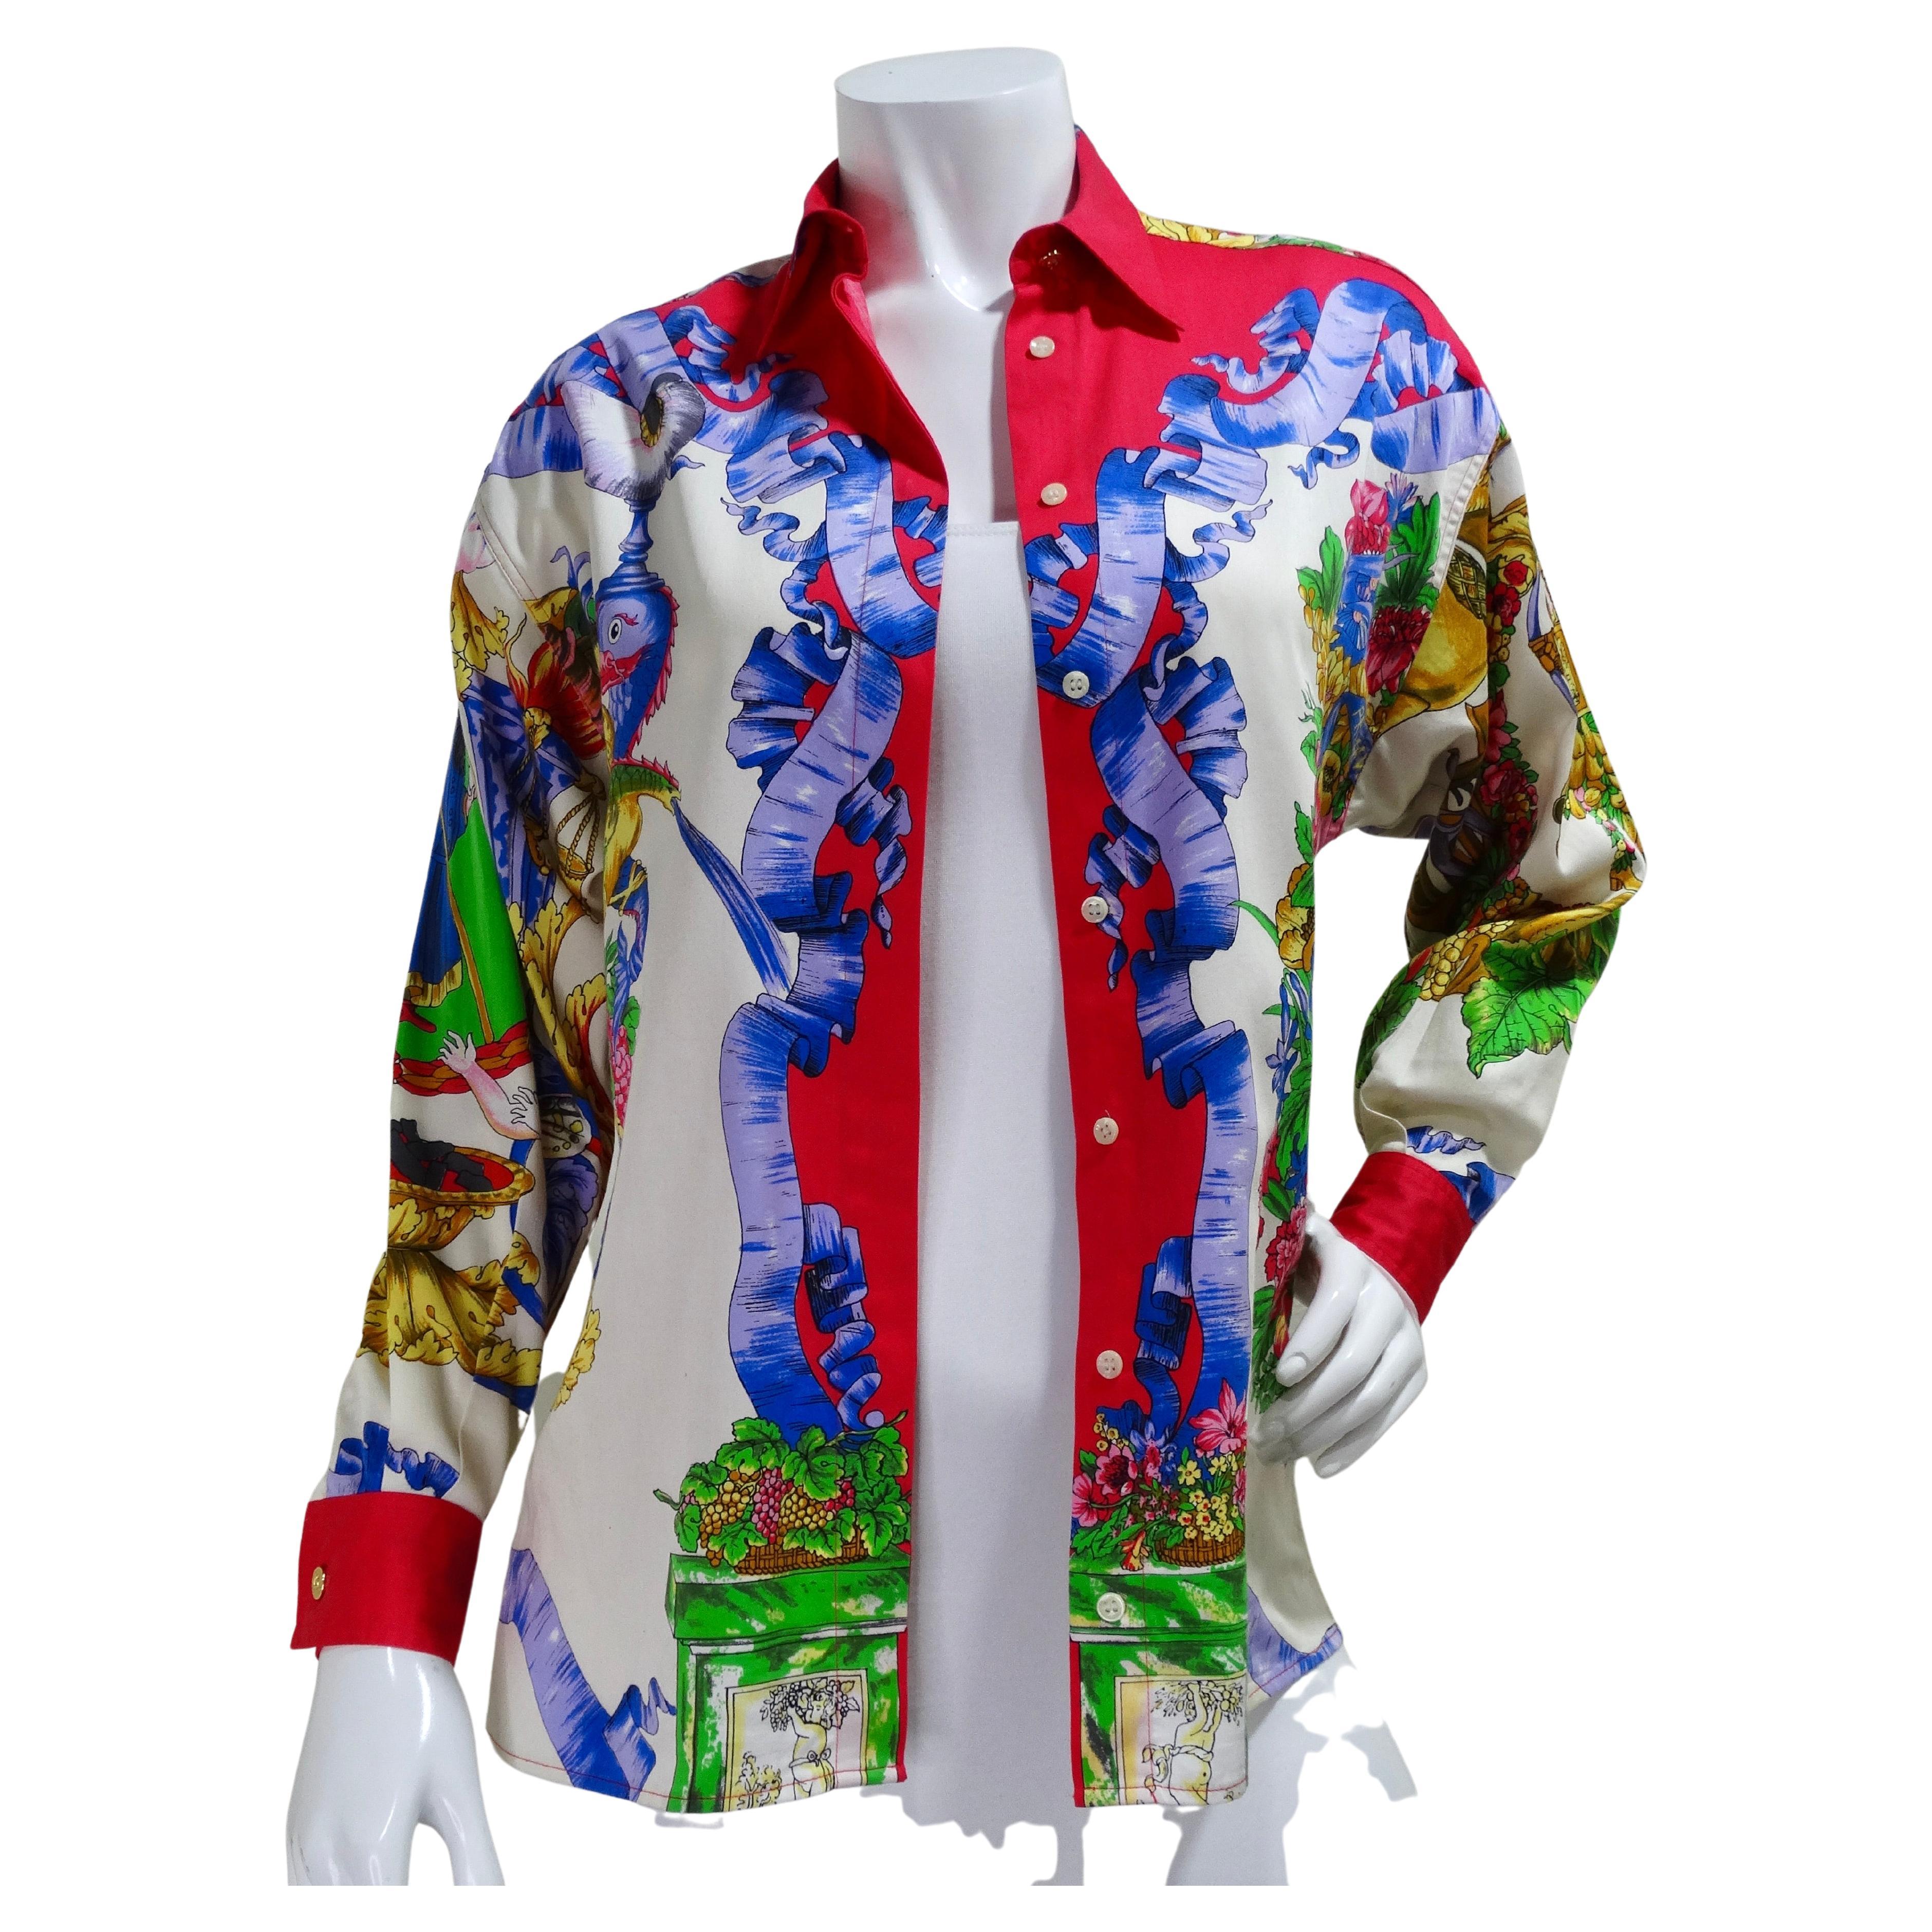 Get your hands on this cool and vibrant blouse! By none other than the Gianni Versace, he introduced Versus as a secondary line as a gift to his adored sister, Donatella. Each collection of Versus is ready-to-wear and comprised of accessories,